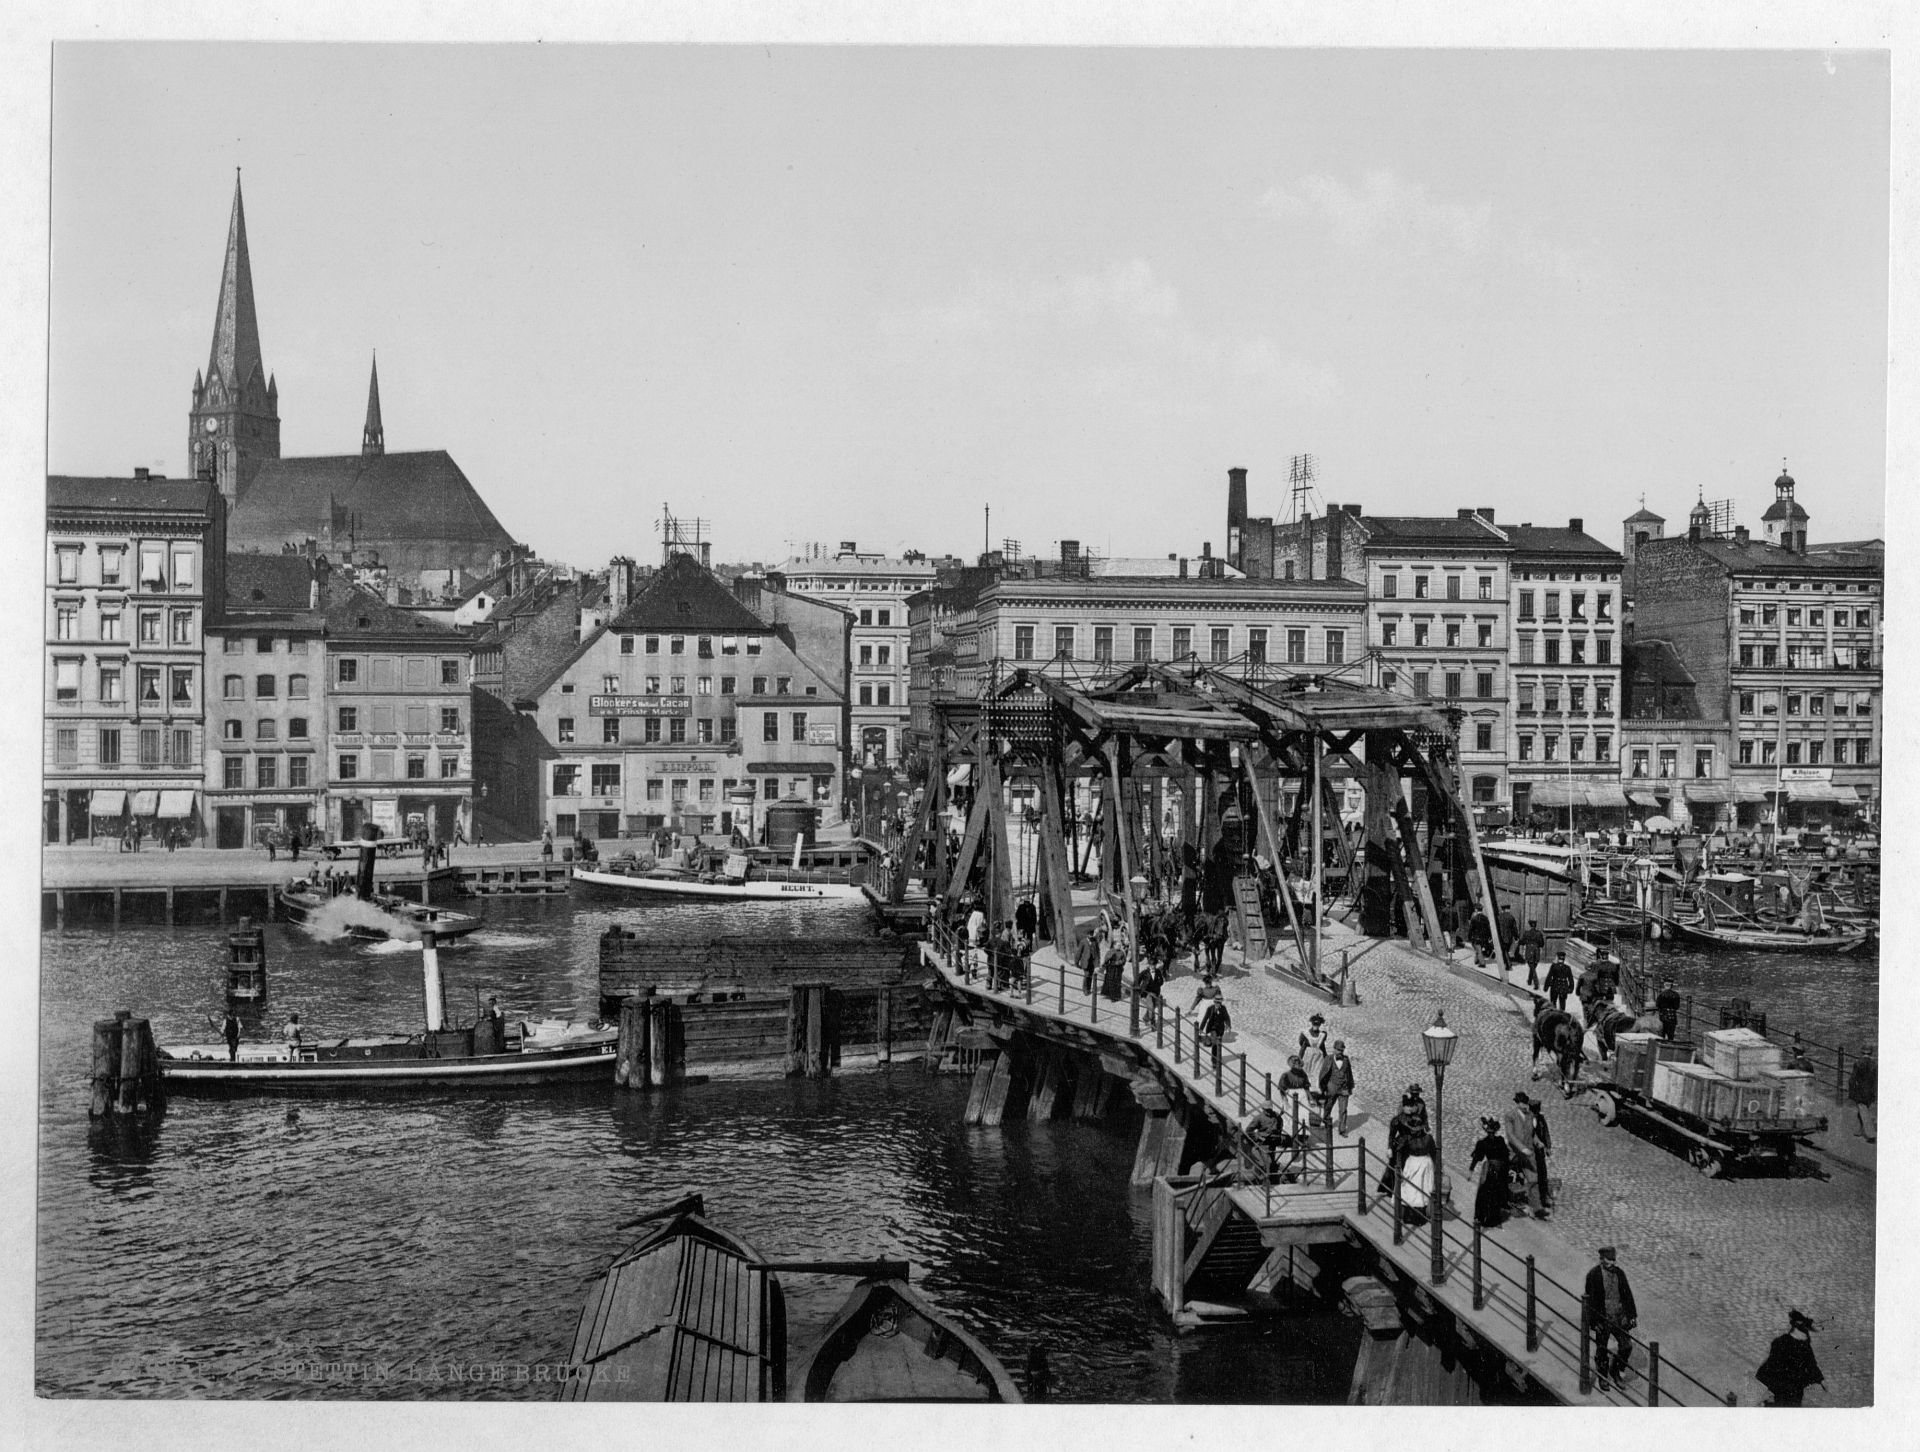 General view and Great Bridge, Stettin, Germany